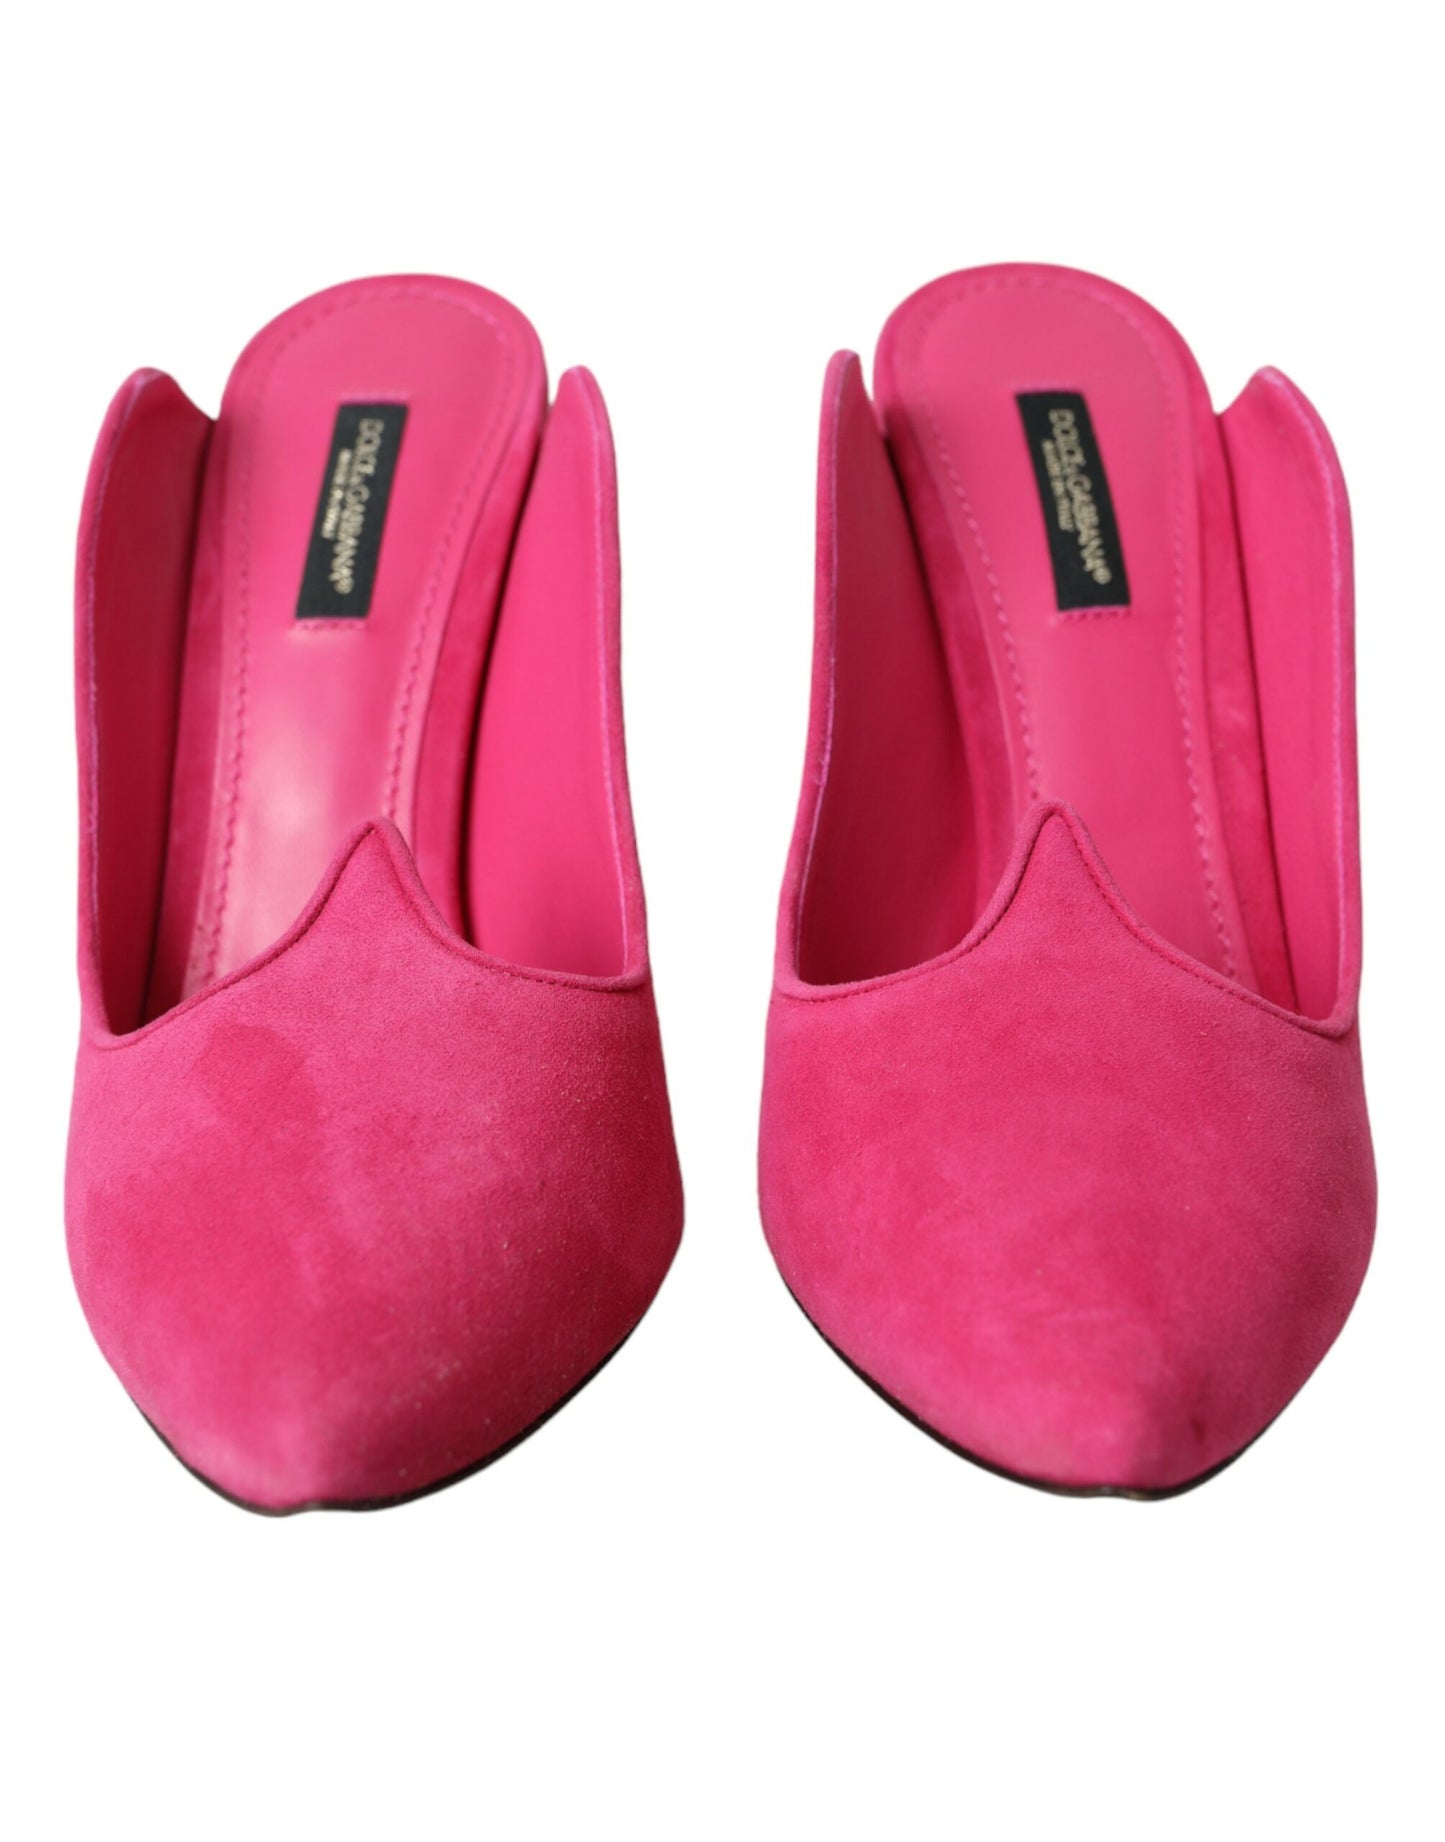 Dolce & Gabbana Fuchsia Suede Leather Mules Sandals Shoes